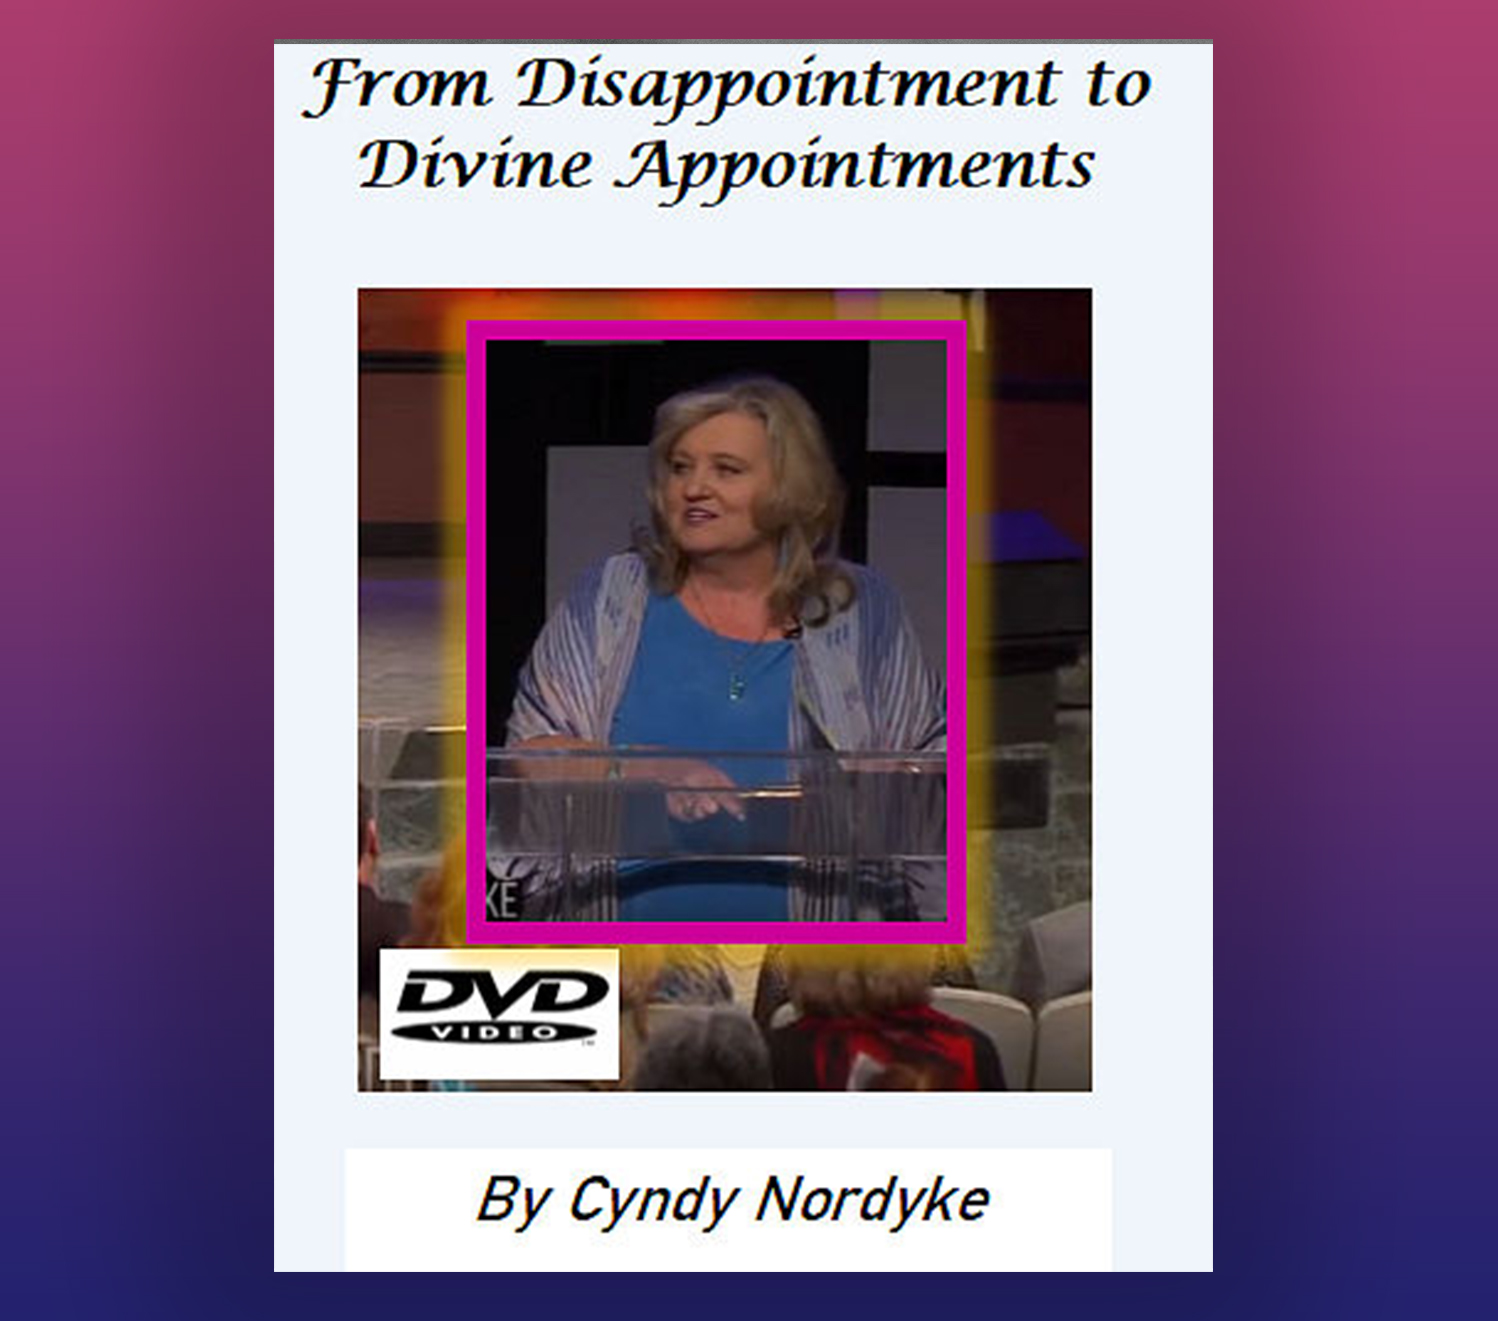 From Disappointment to Divine Appointment DVD By Cyndy Nordyke